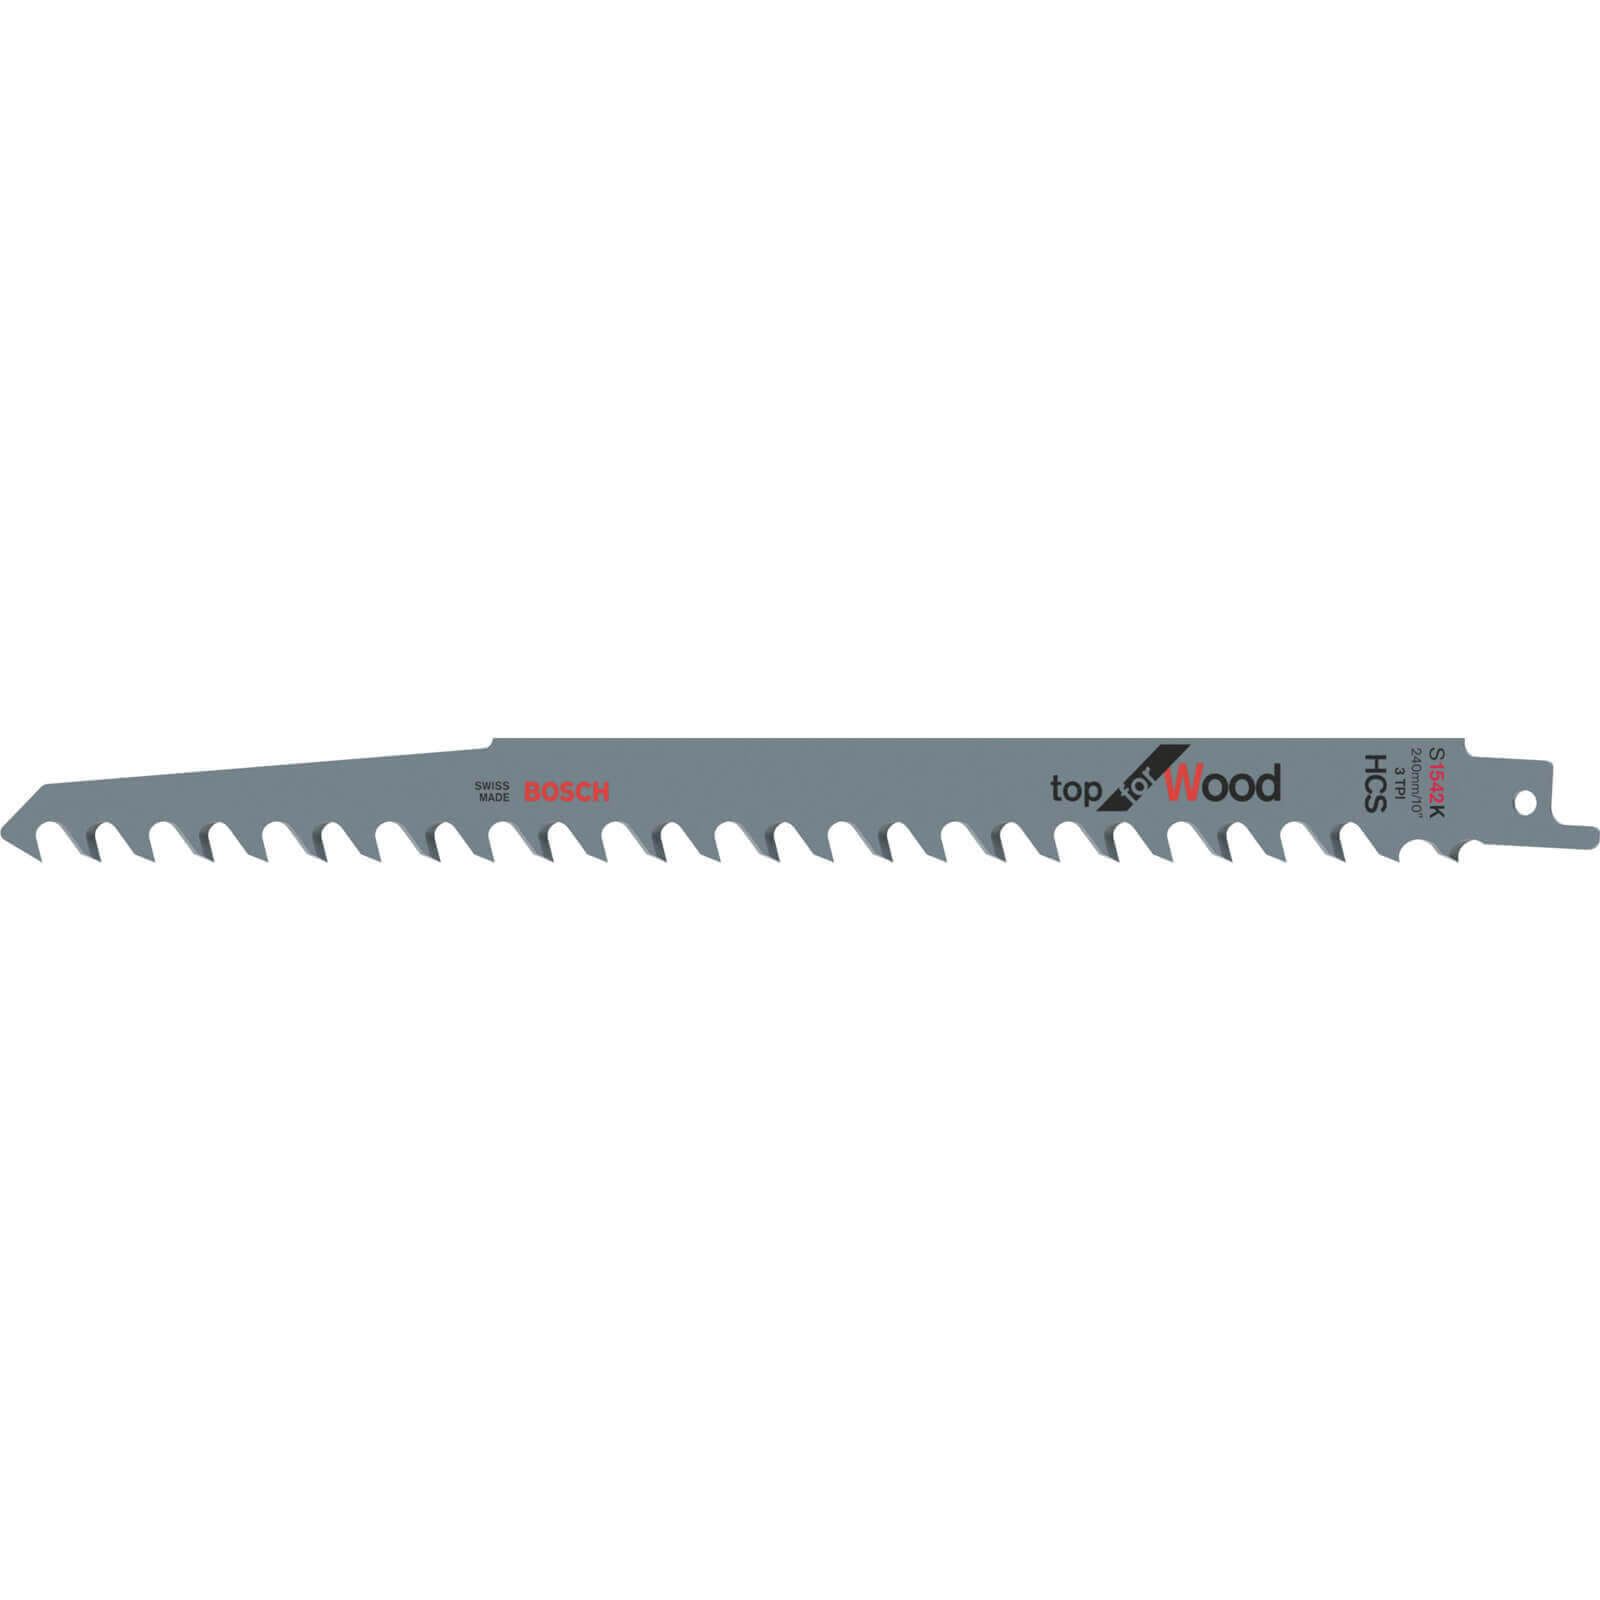 Image of Bosch S1542K Reciprocating Sabre Saw Blades Pack of 2